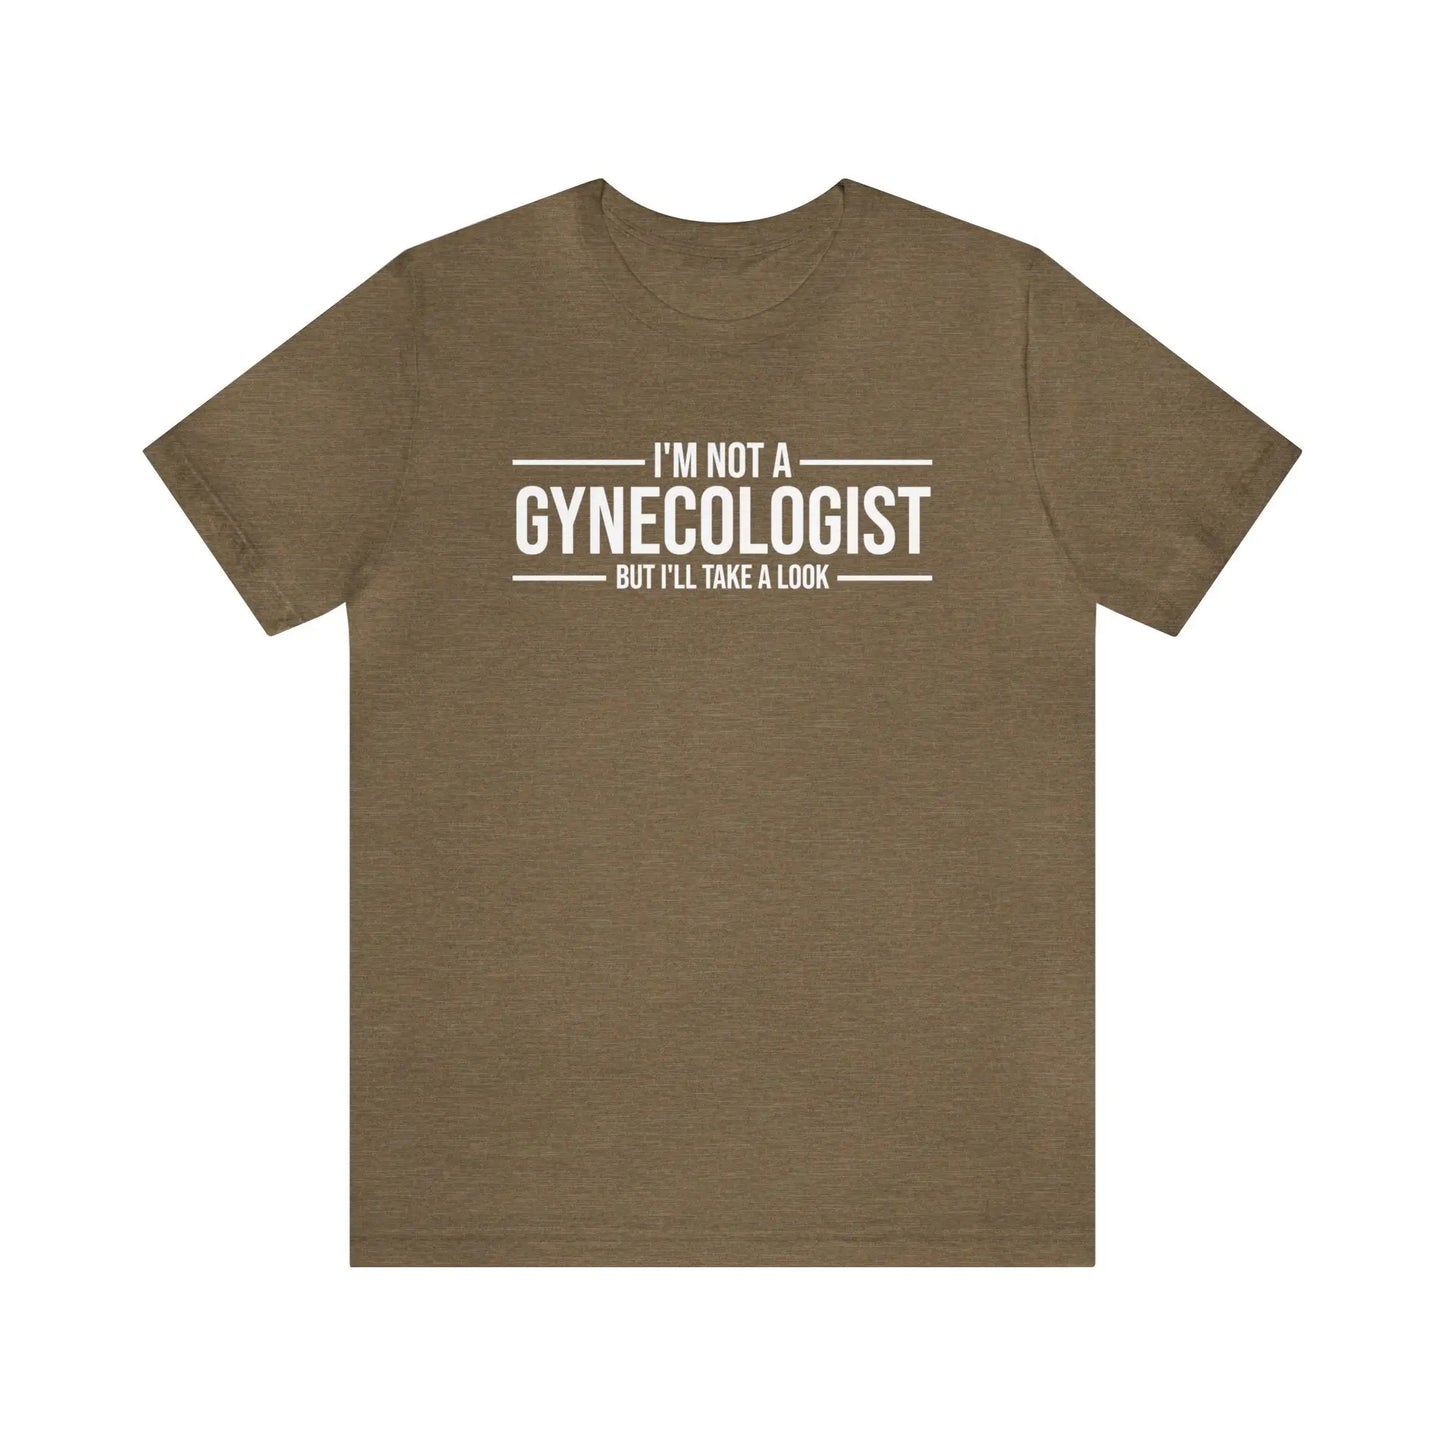 I'm Not A Gynecologist Men's Short Sleeve Tee - Wicked Tees